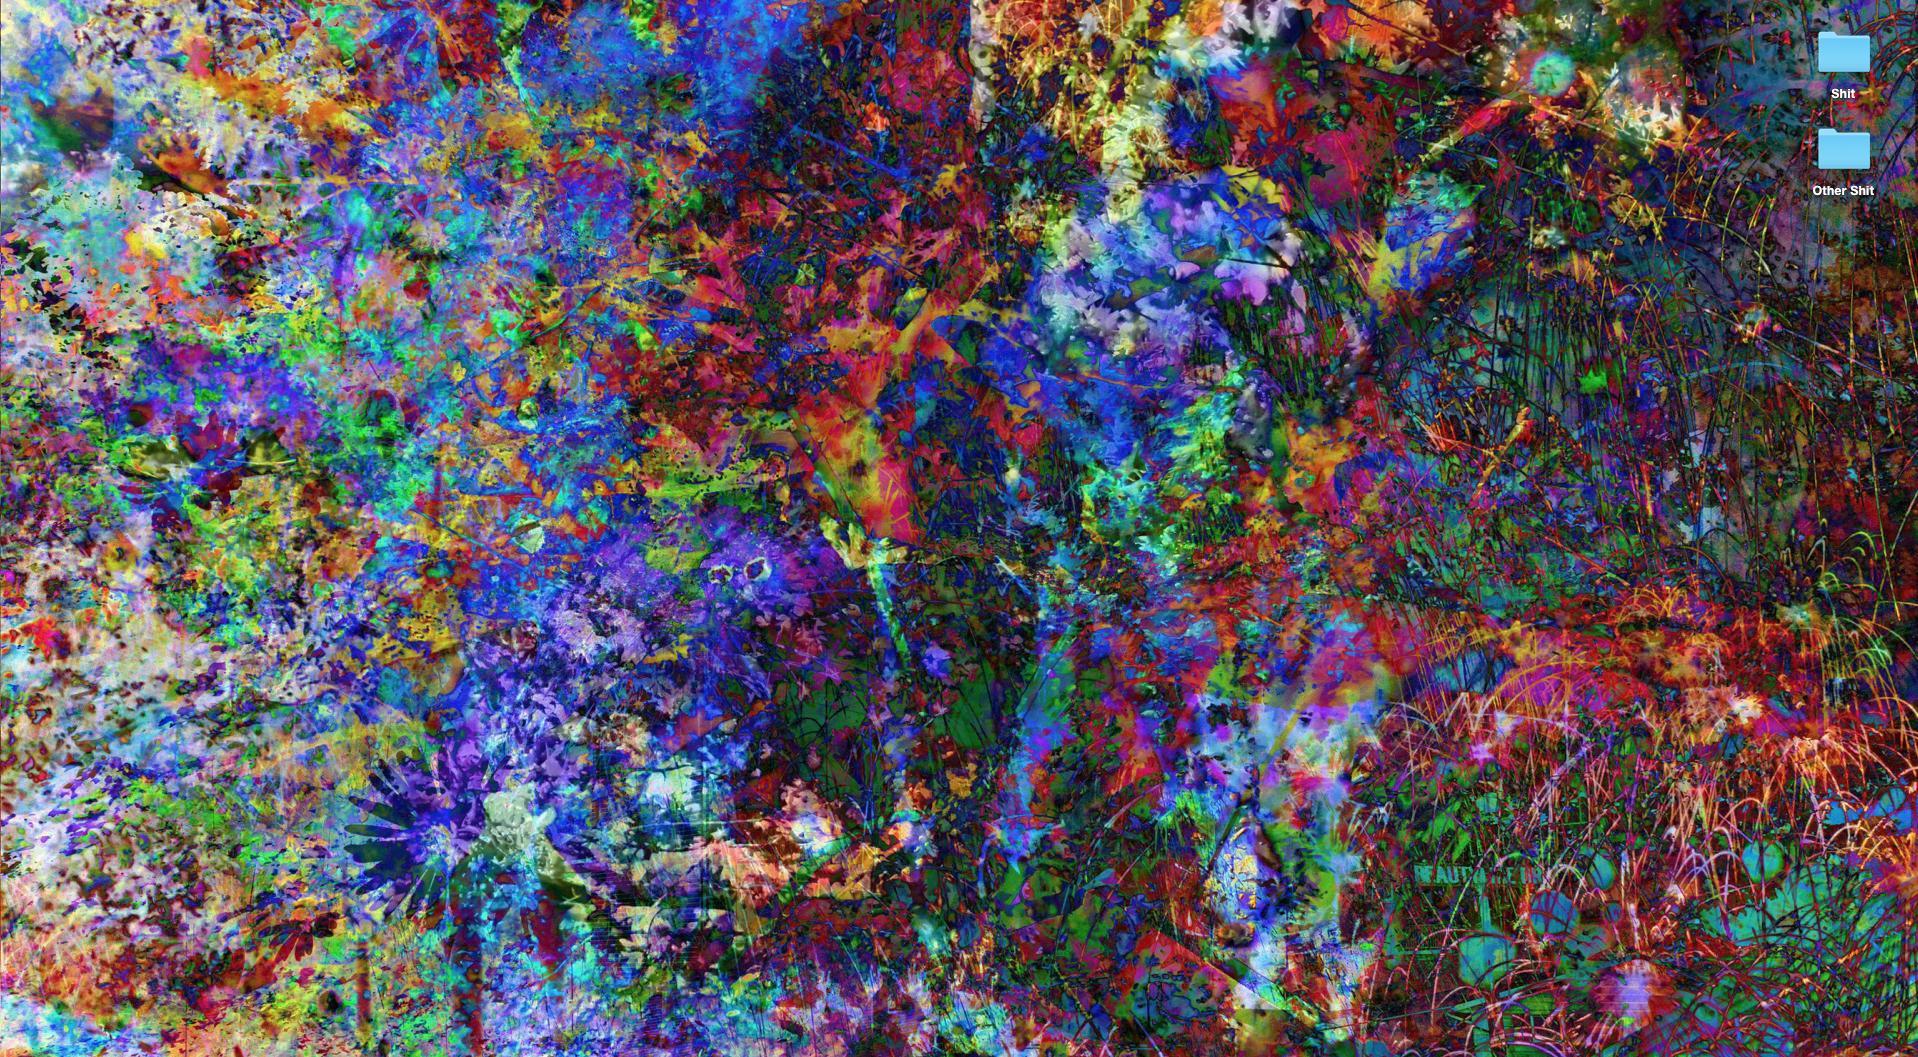 Screw it, I'll just become Jackson Pollock as my wallpaper. I can